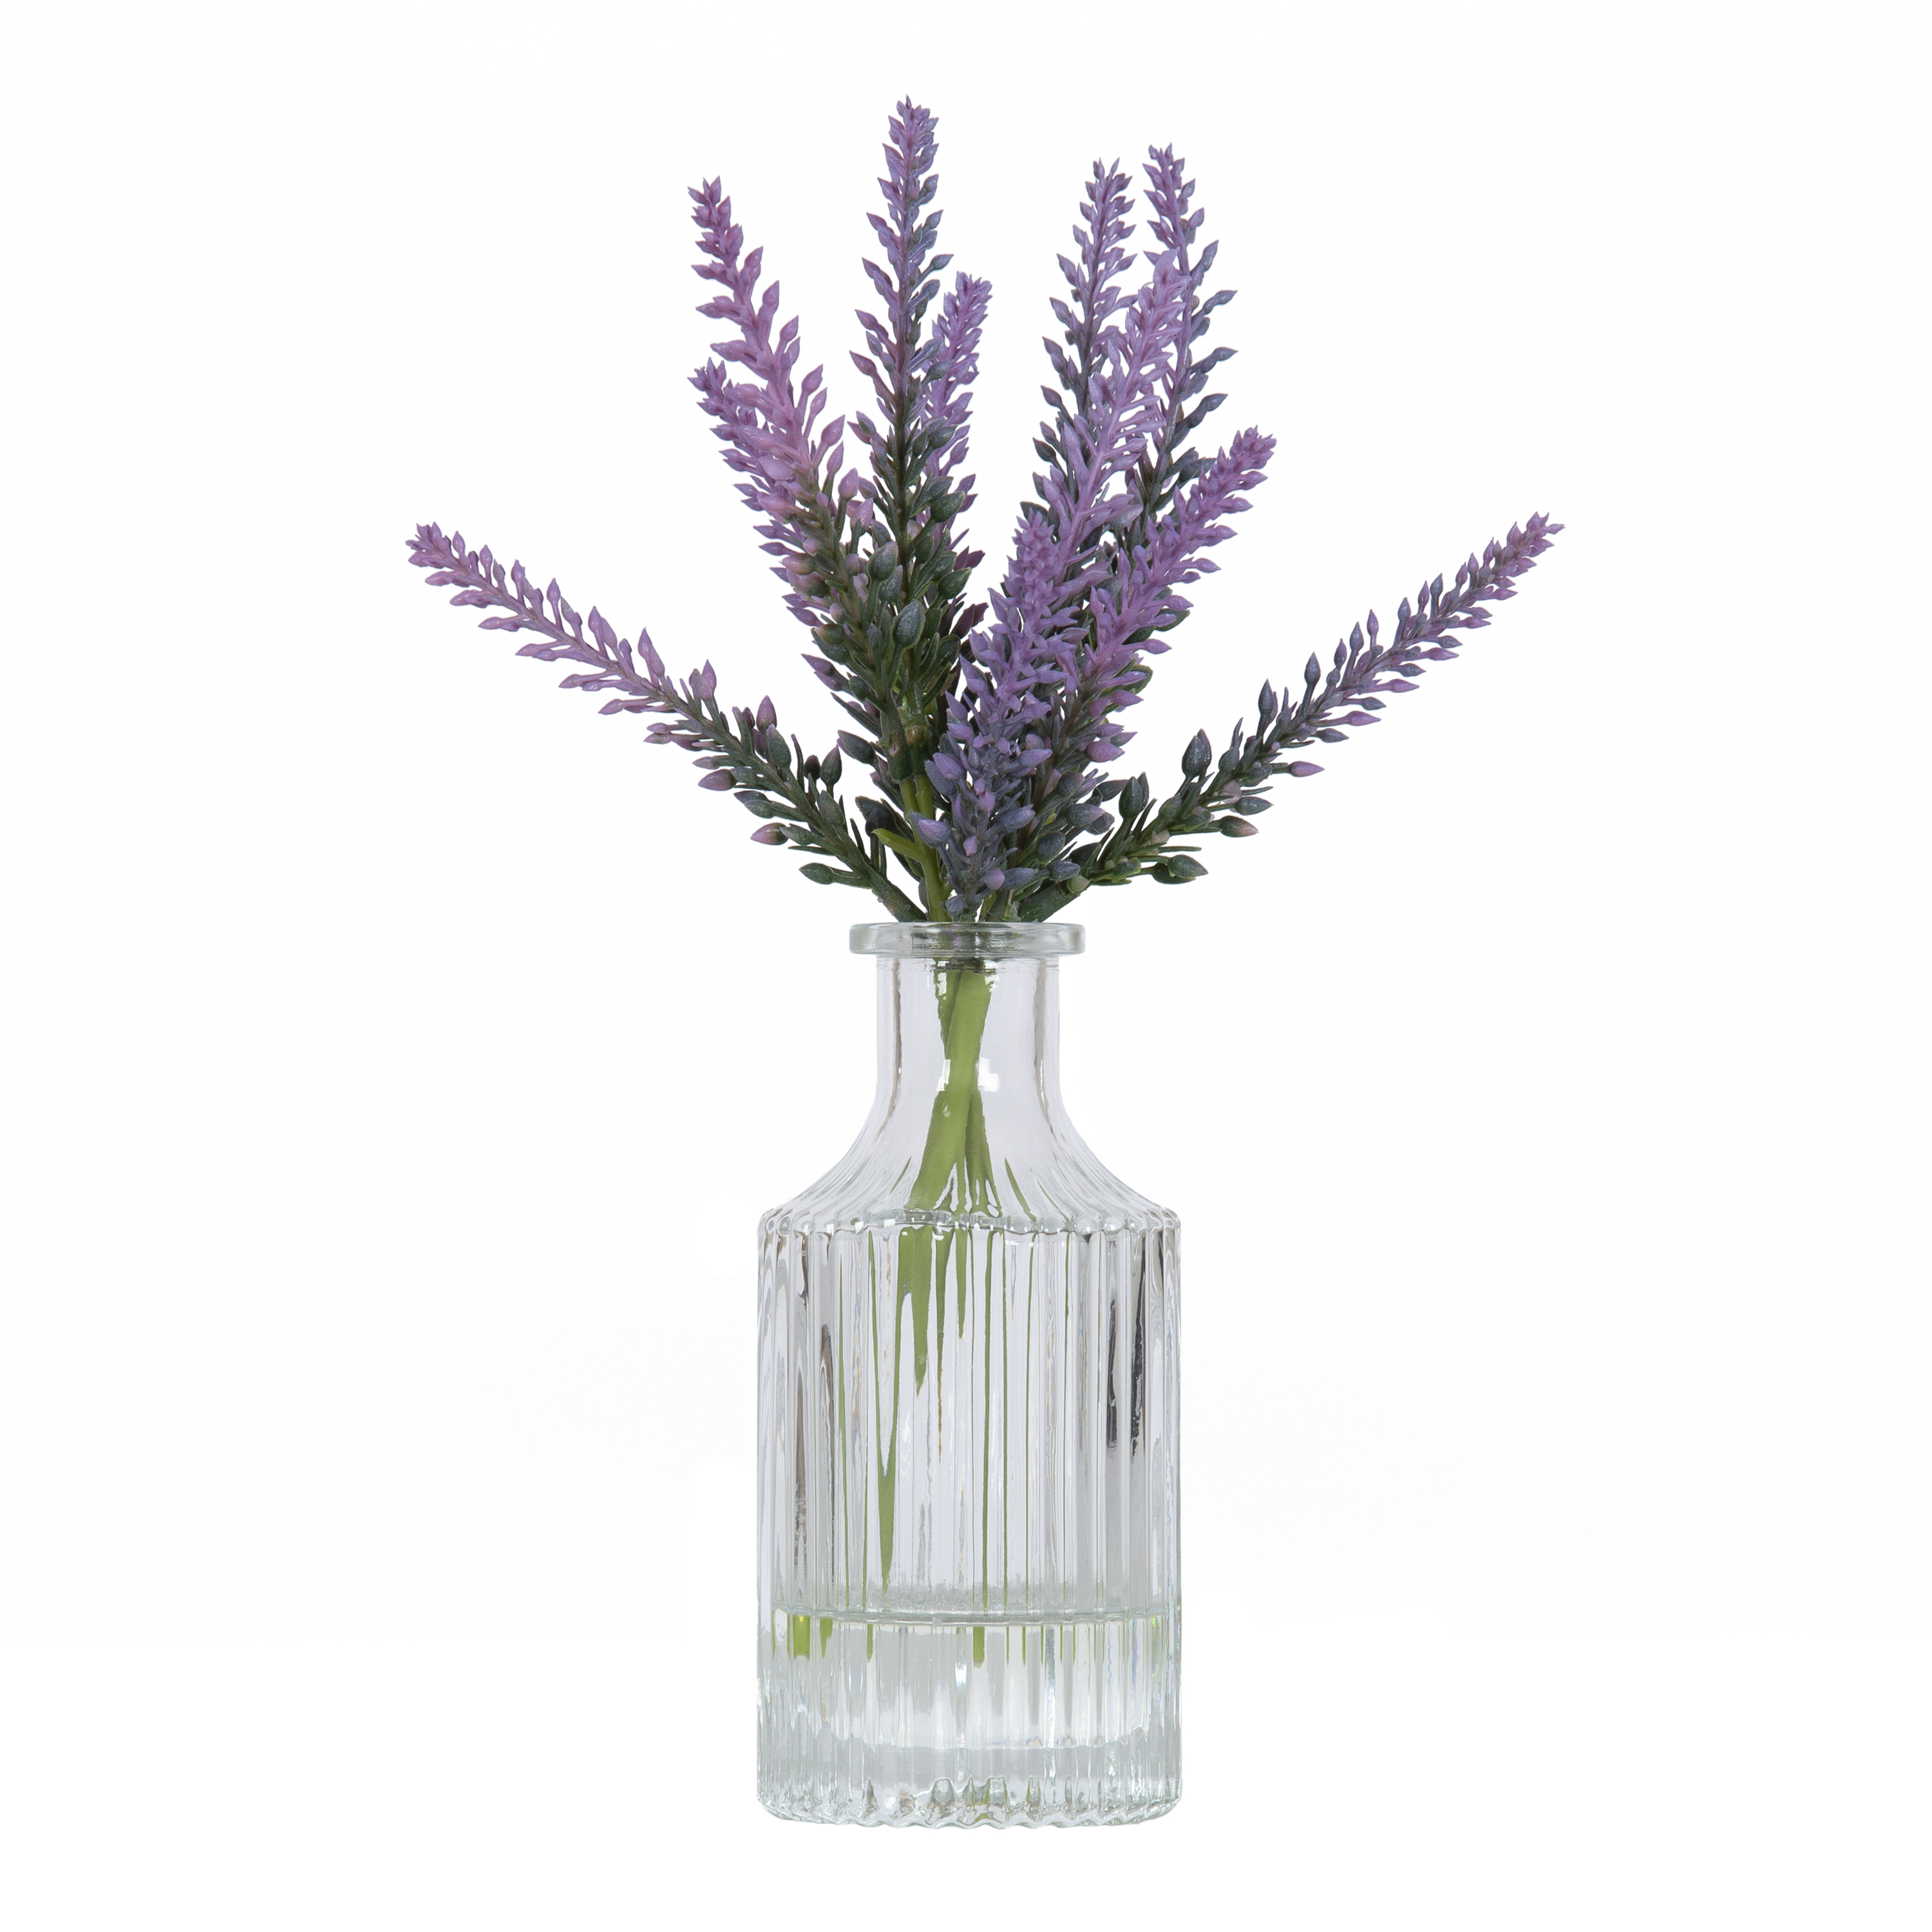 Mainstays 10.5" Artificial Lavender Flower Stems in Ribbed Glass Vase - image 3 of 10